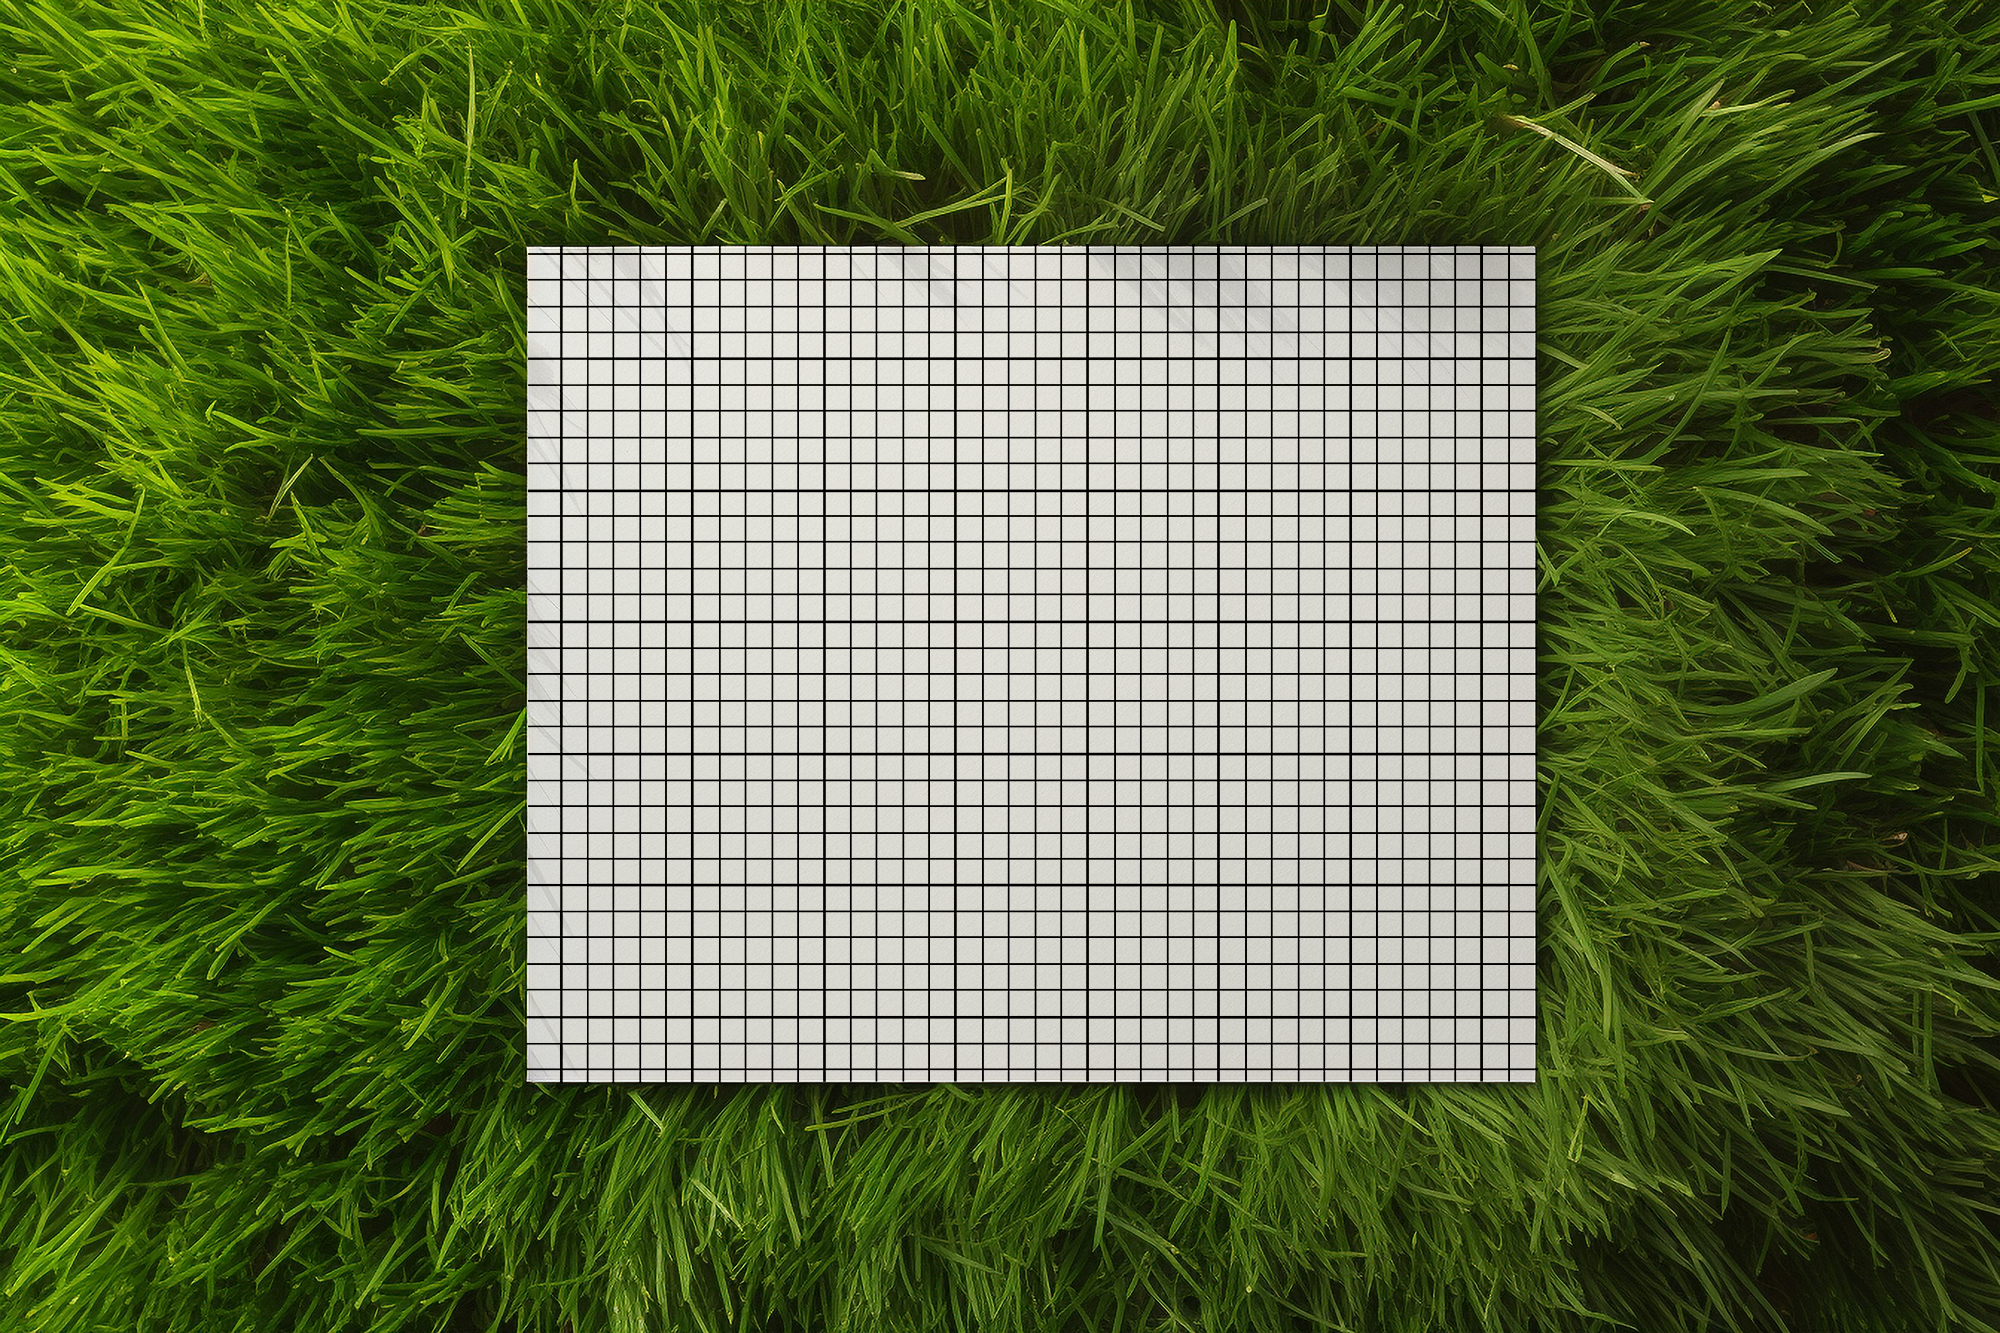 Square photoshop paper mockup on grass